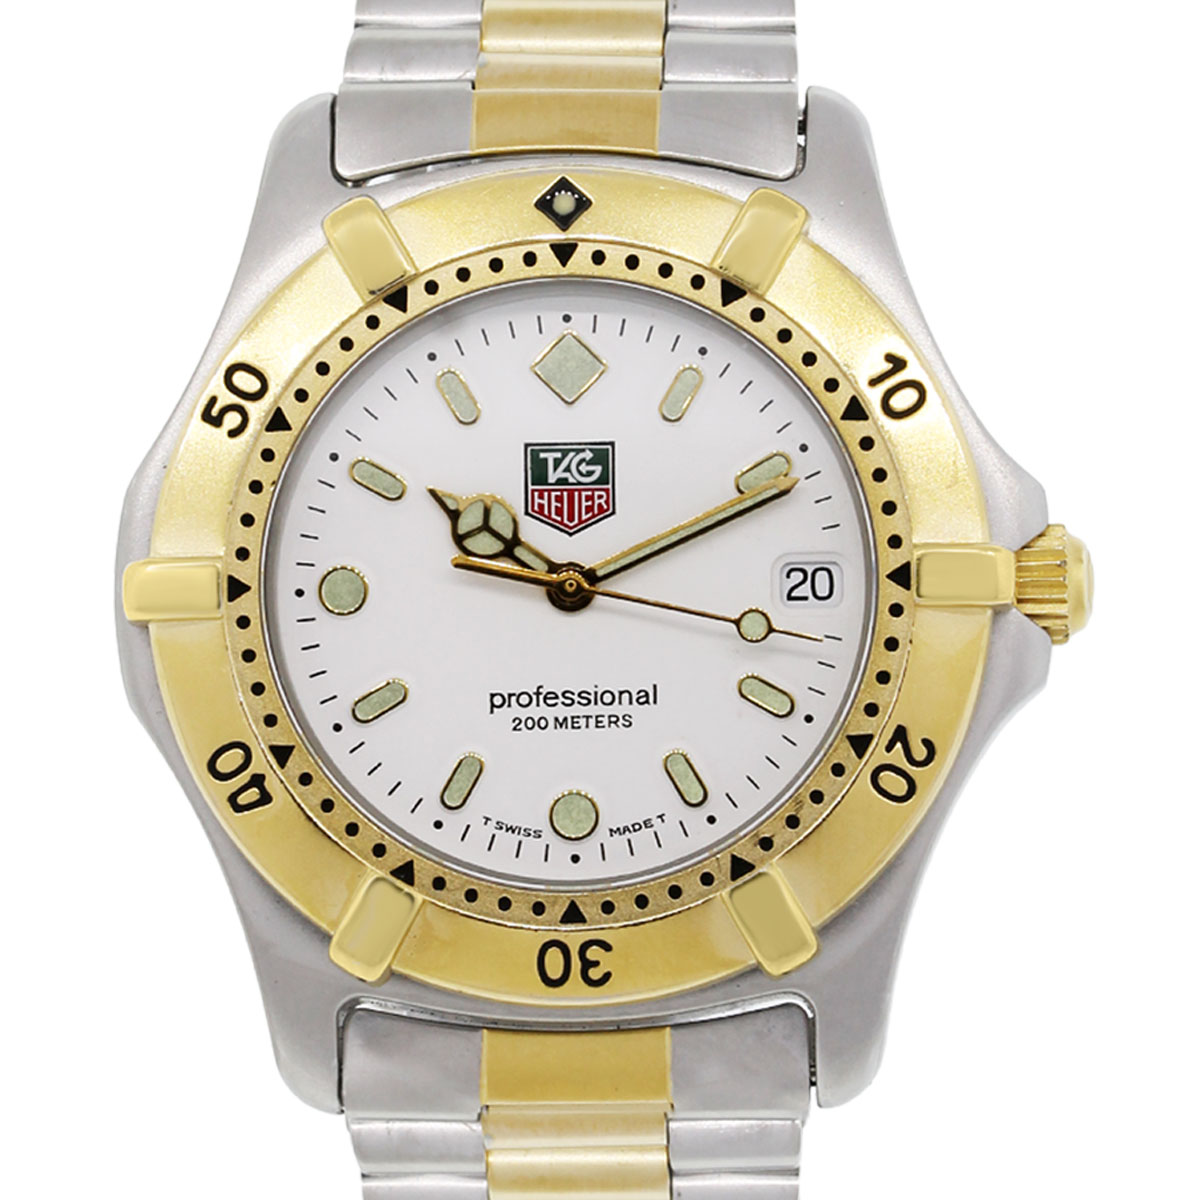 tag-heuer-we1122-r-professional-2000-series-two-tone-watch